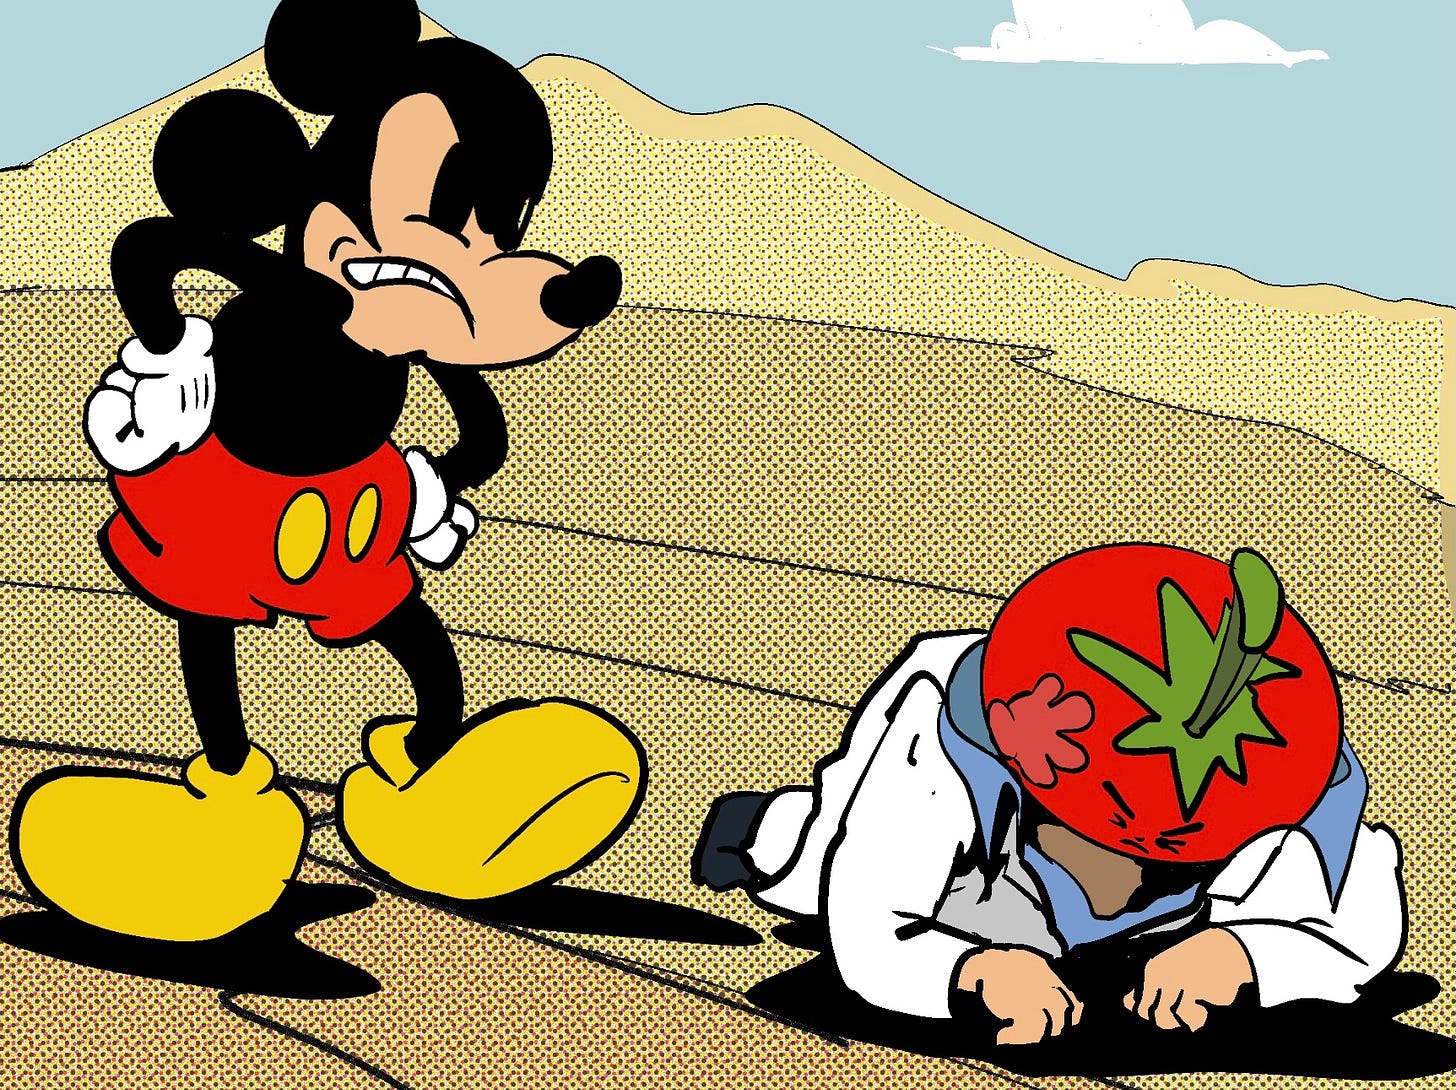 Dana White crawls away from a slap to the face delivered by Mickey Mouse.